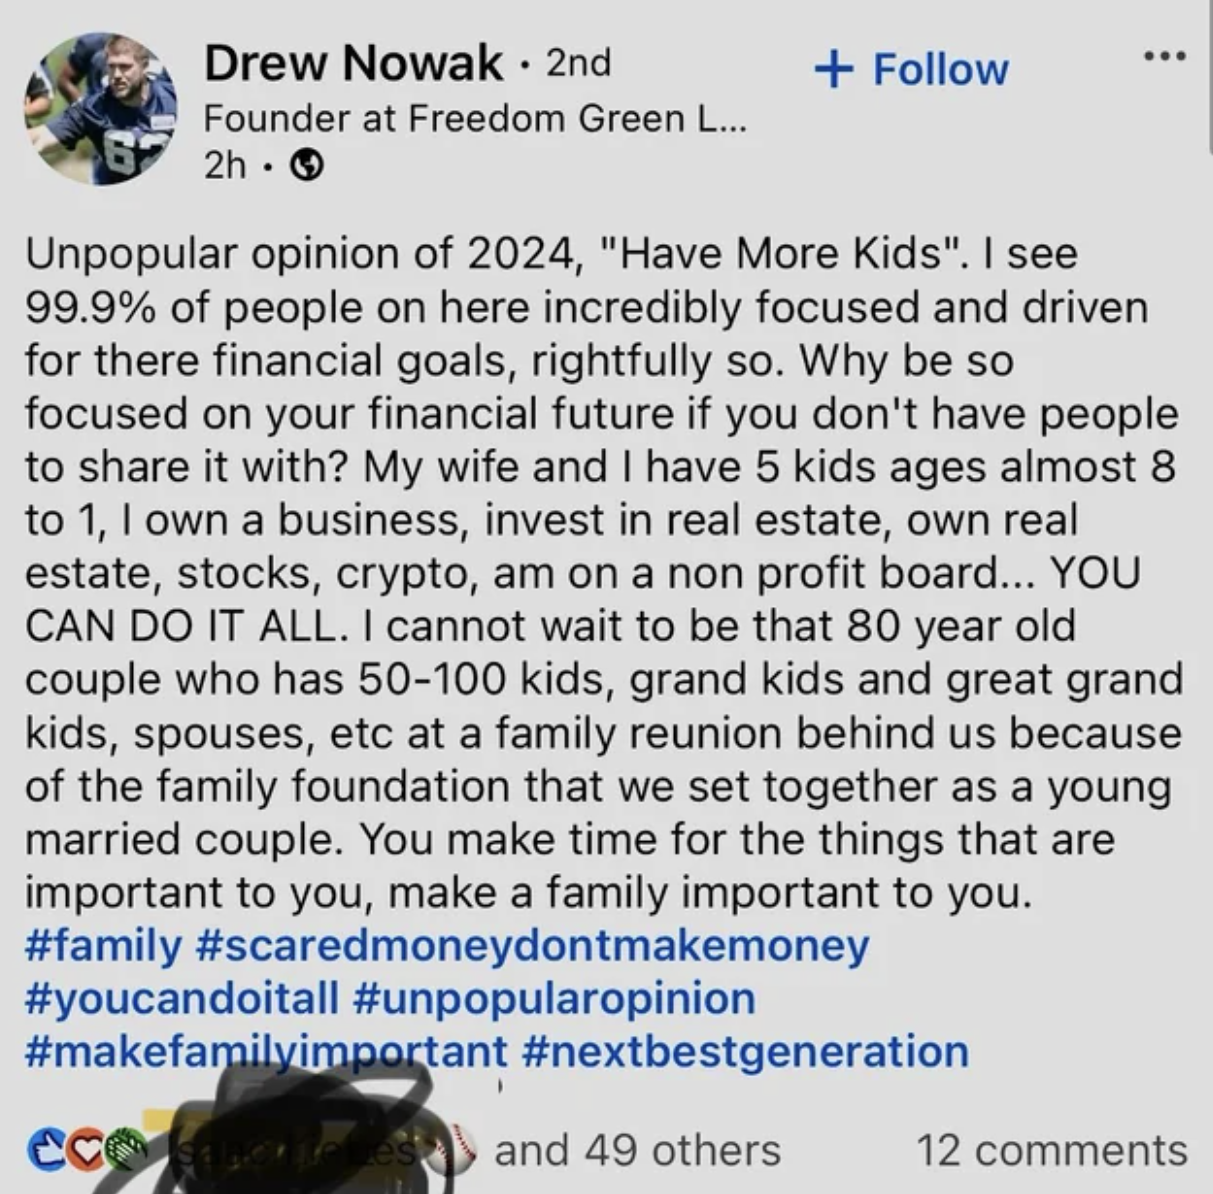 screenshot - Drew Nowak 2nd Founder at Freedom Green L... 2h. Unpopular opinion of 2024, "Have More Kids". I see 99.9% of people on here incredibly focused and driven for there financial goals, rightfully so. Why be so focused on your financial future if 